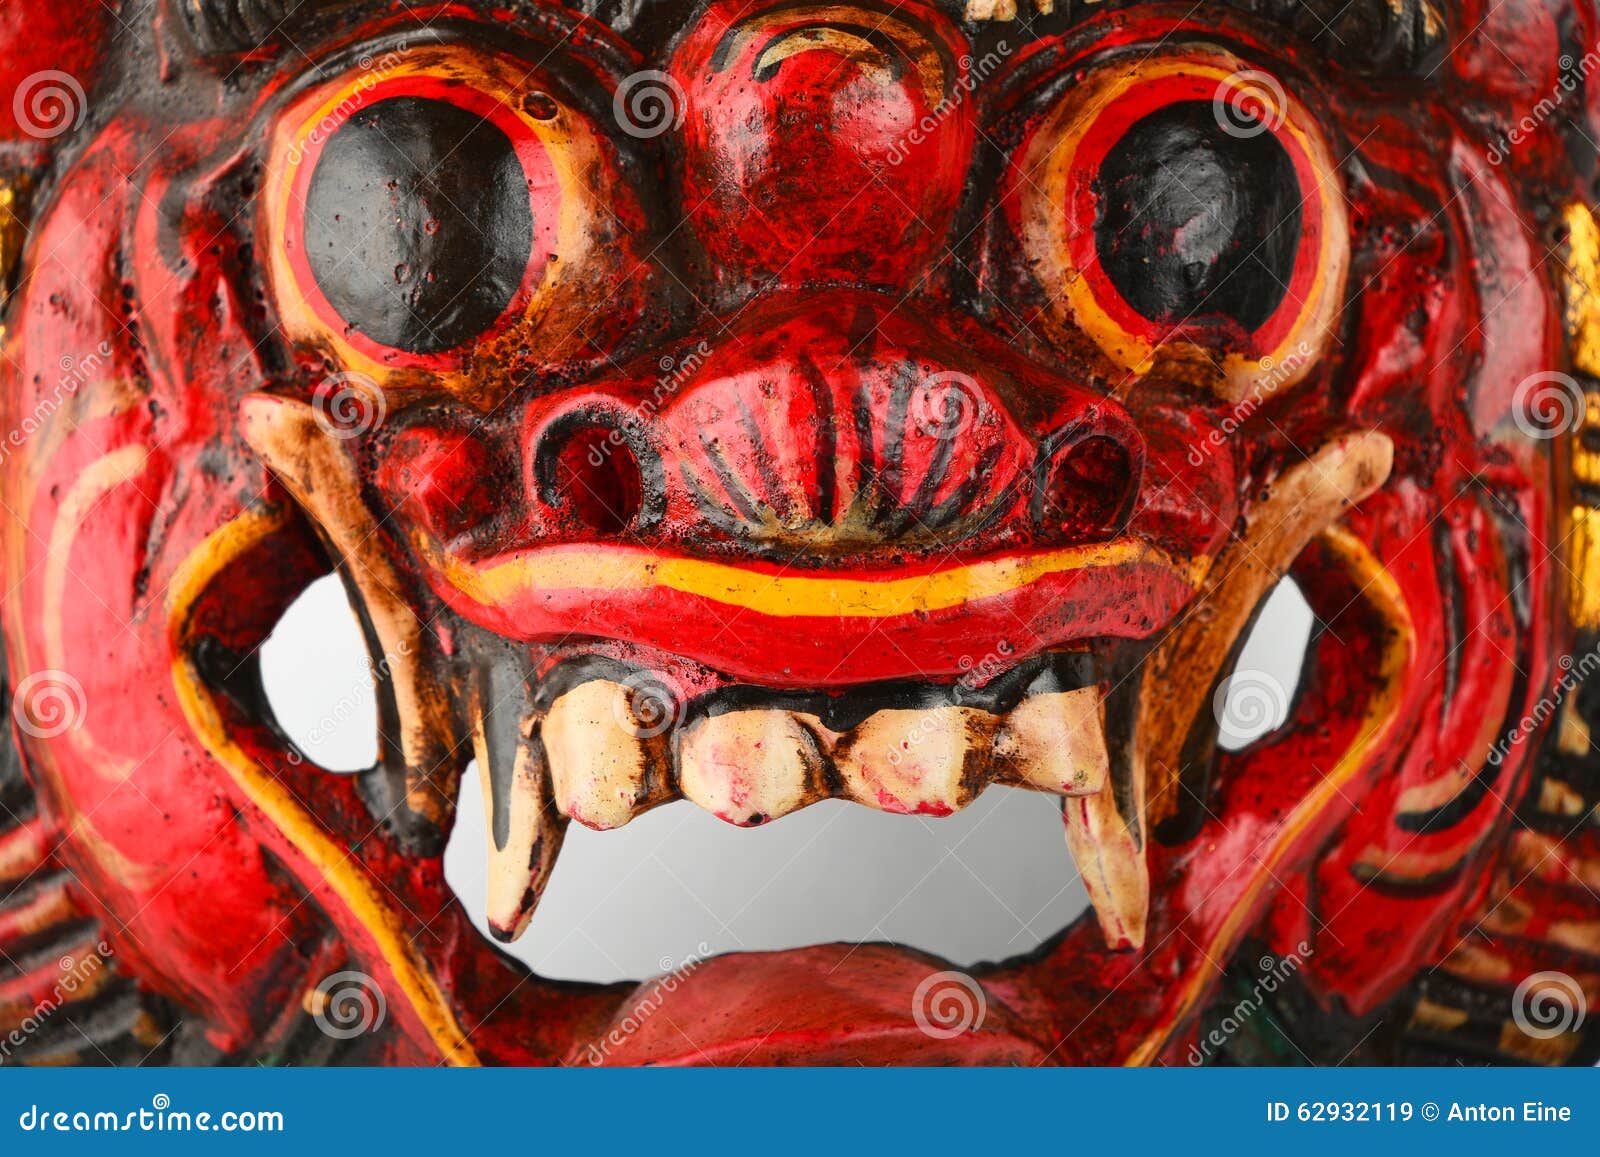 asian traditional wooden red painted demon mask